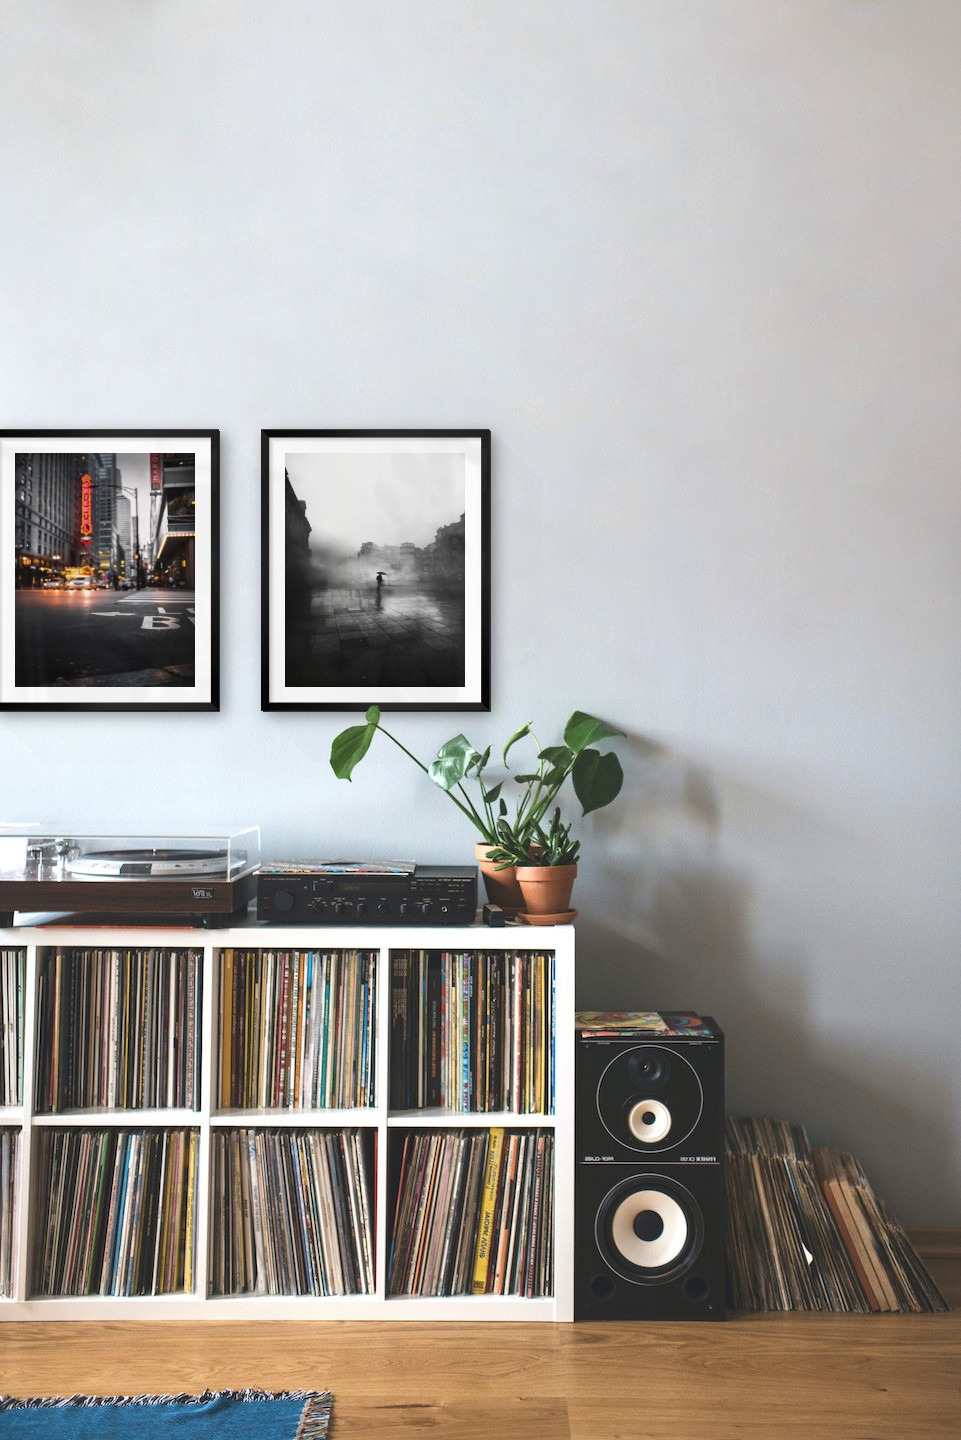 Gallery wall with picture frames in black in sizes 40x50 with prints "Busy city center" and "Rainy city"